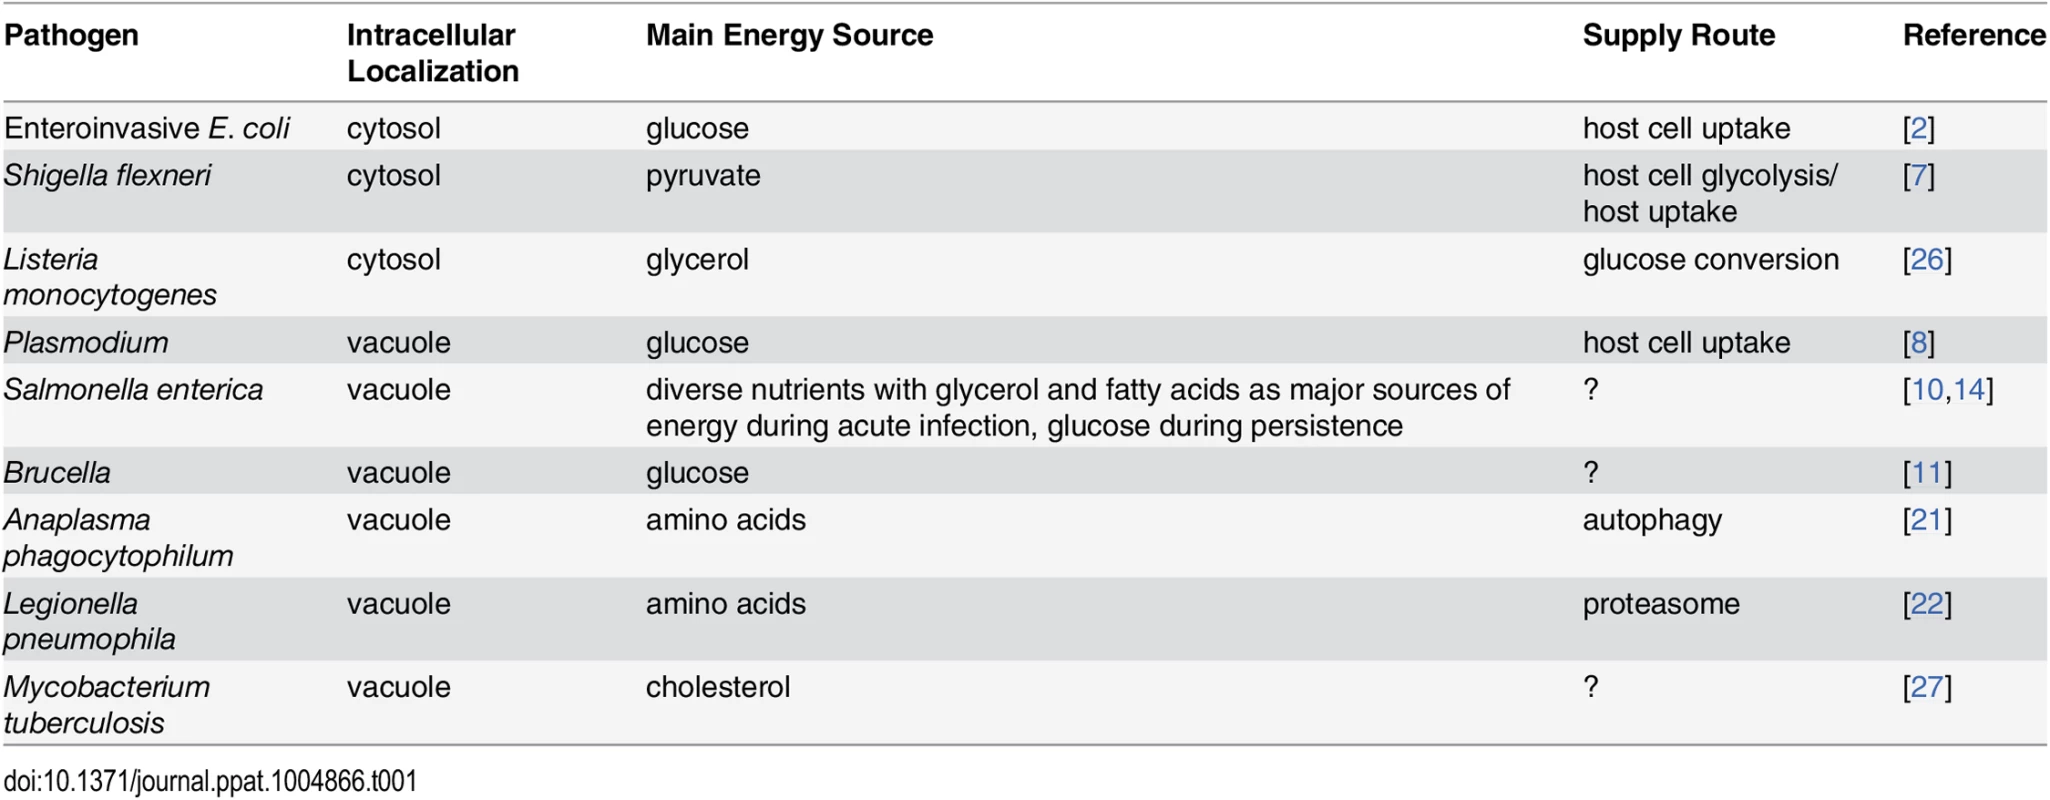 Main energy sources of intracellular pathogens.